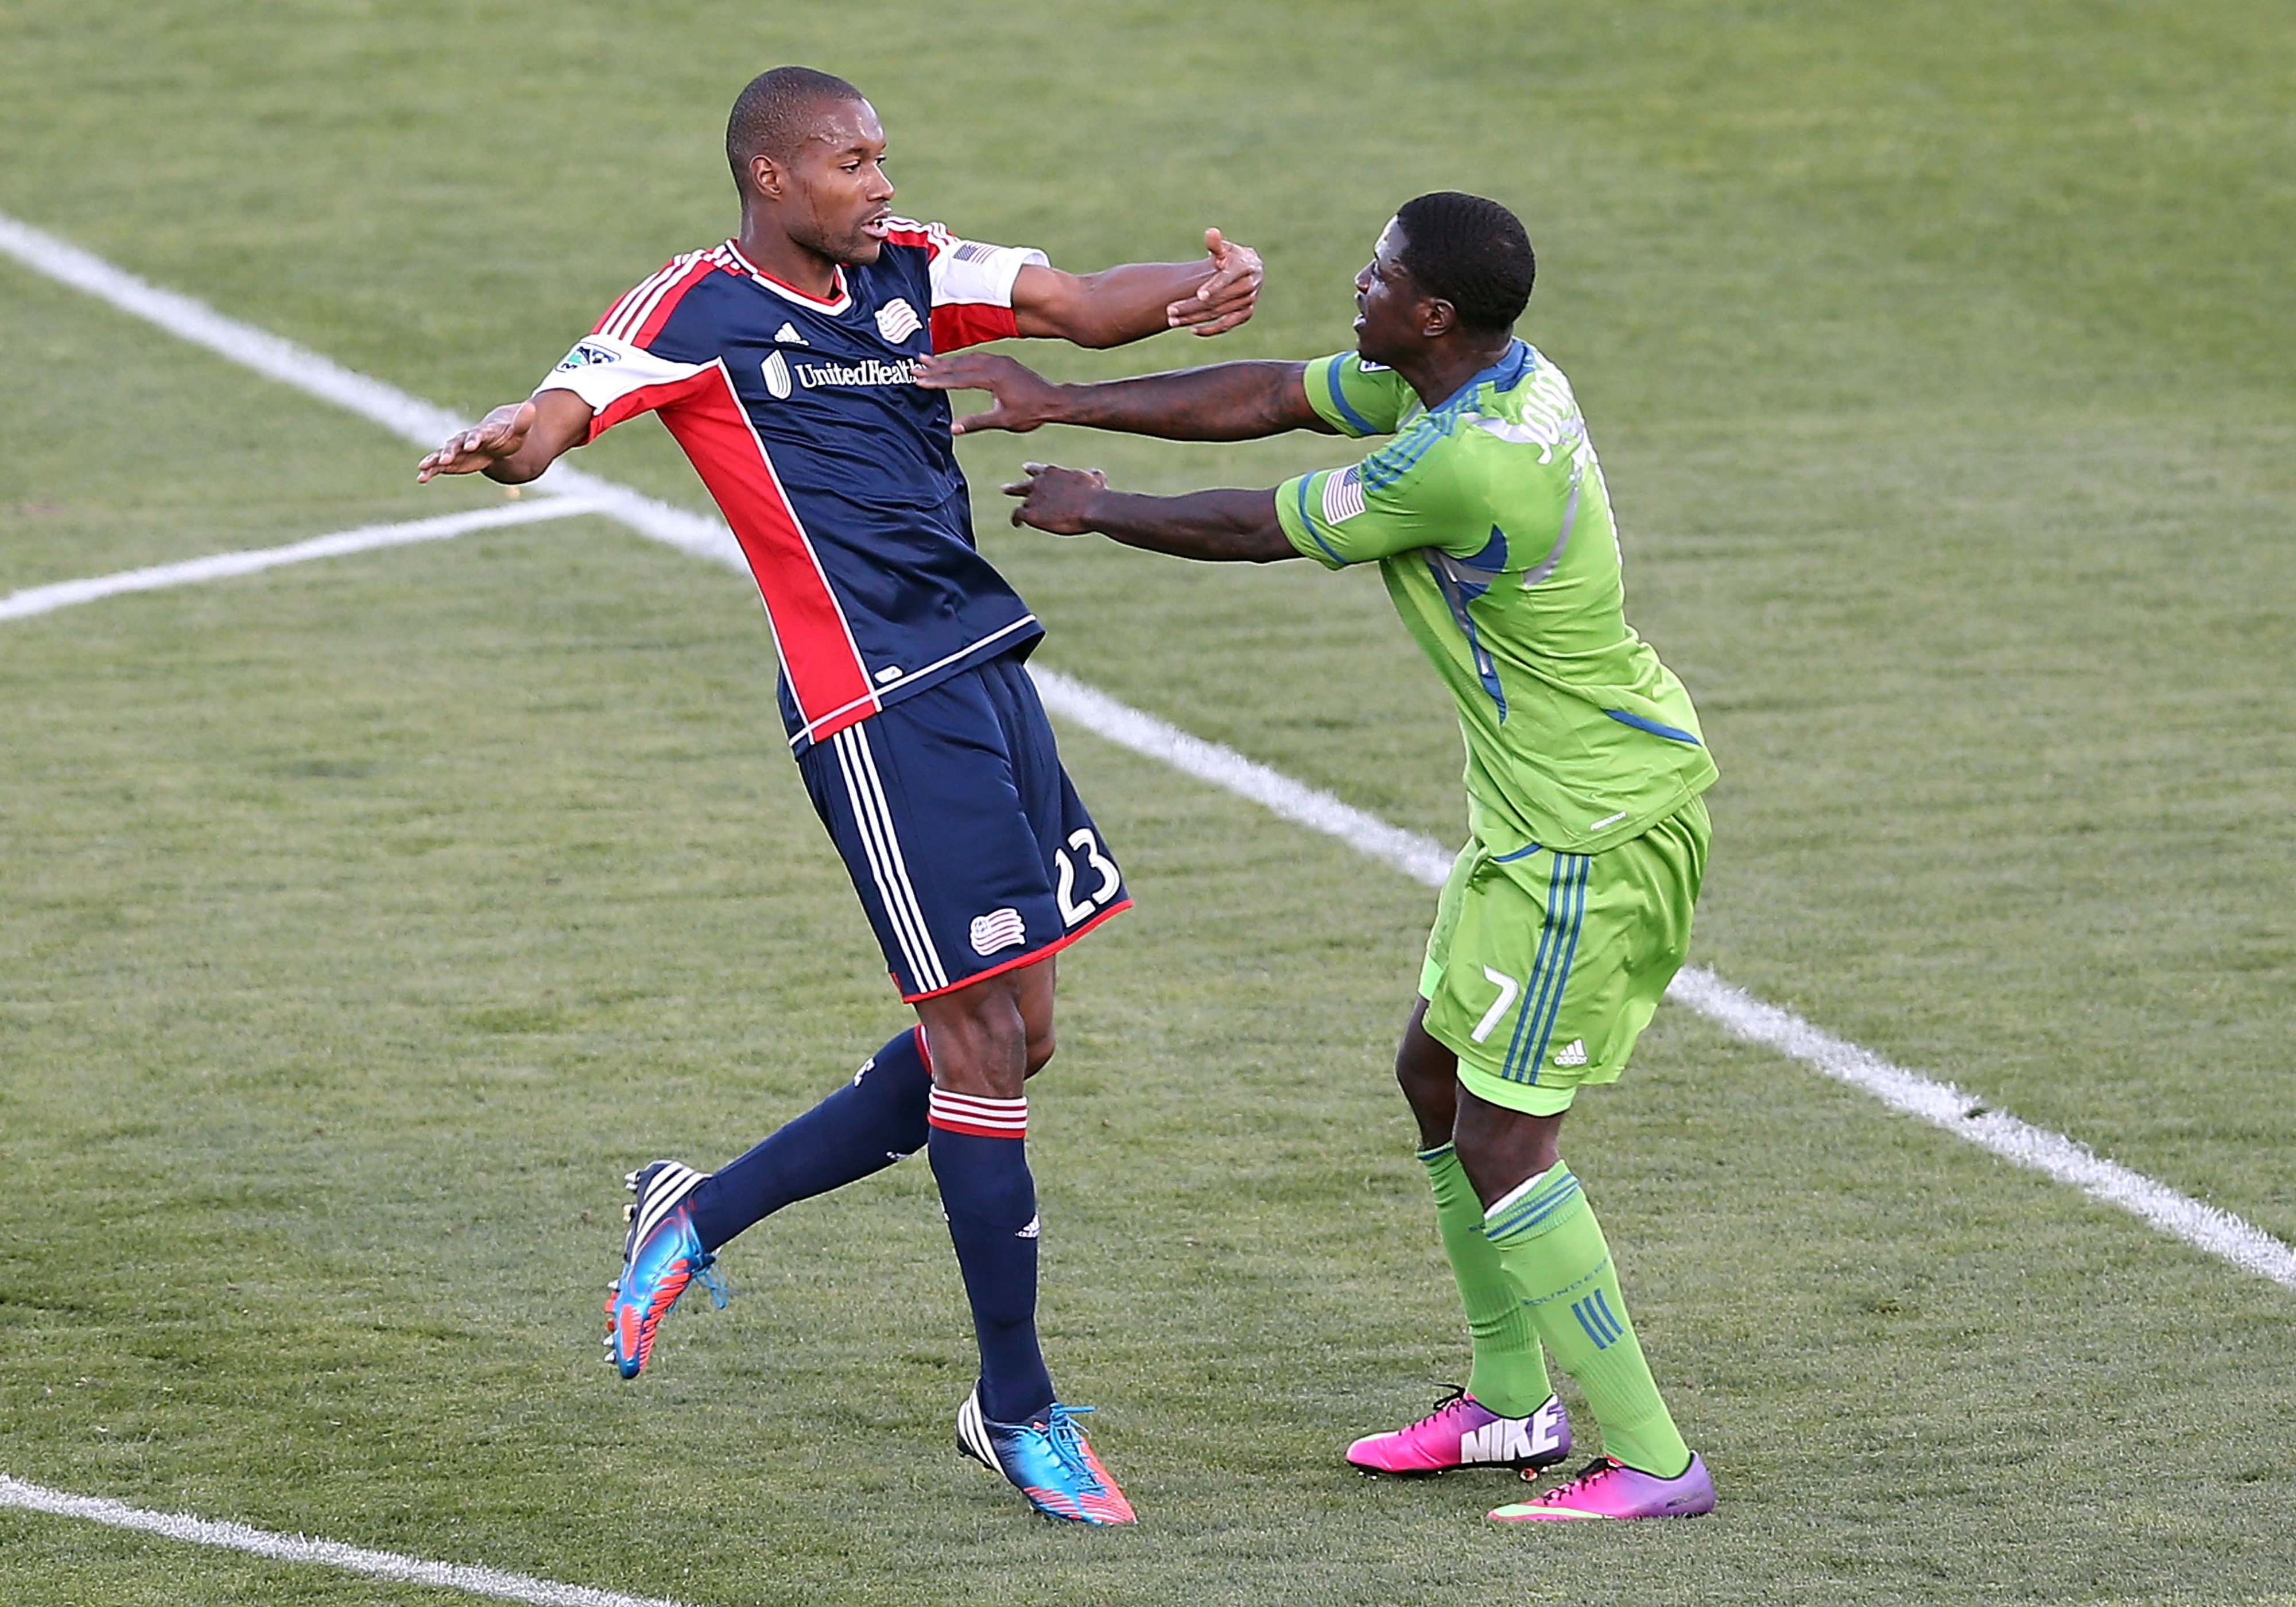 Eddie Johnson shoves Jose Goncalves in one of many first-half confrontations between players